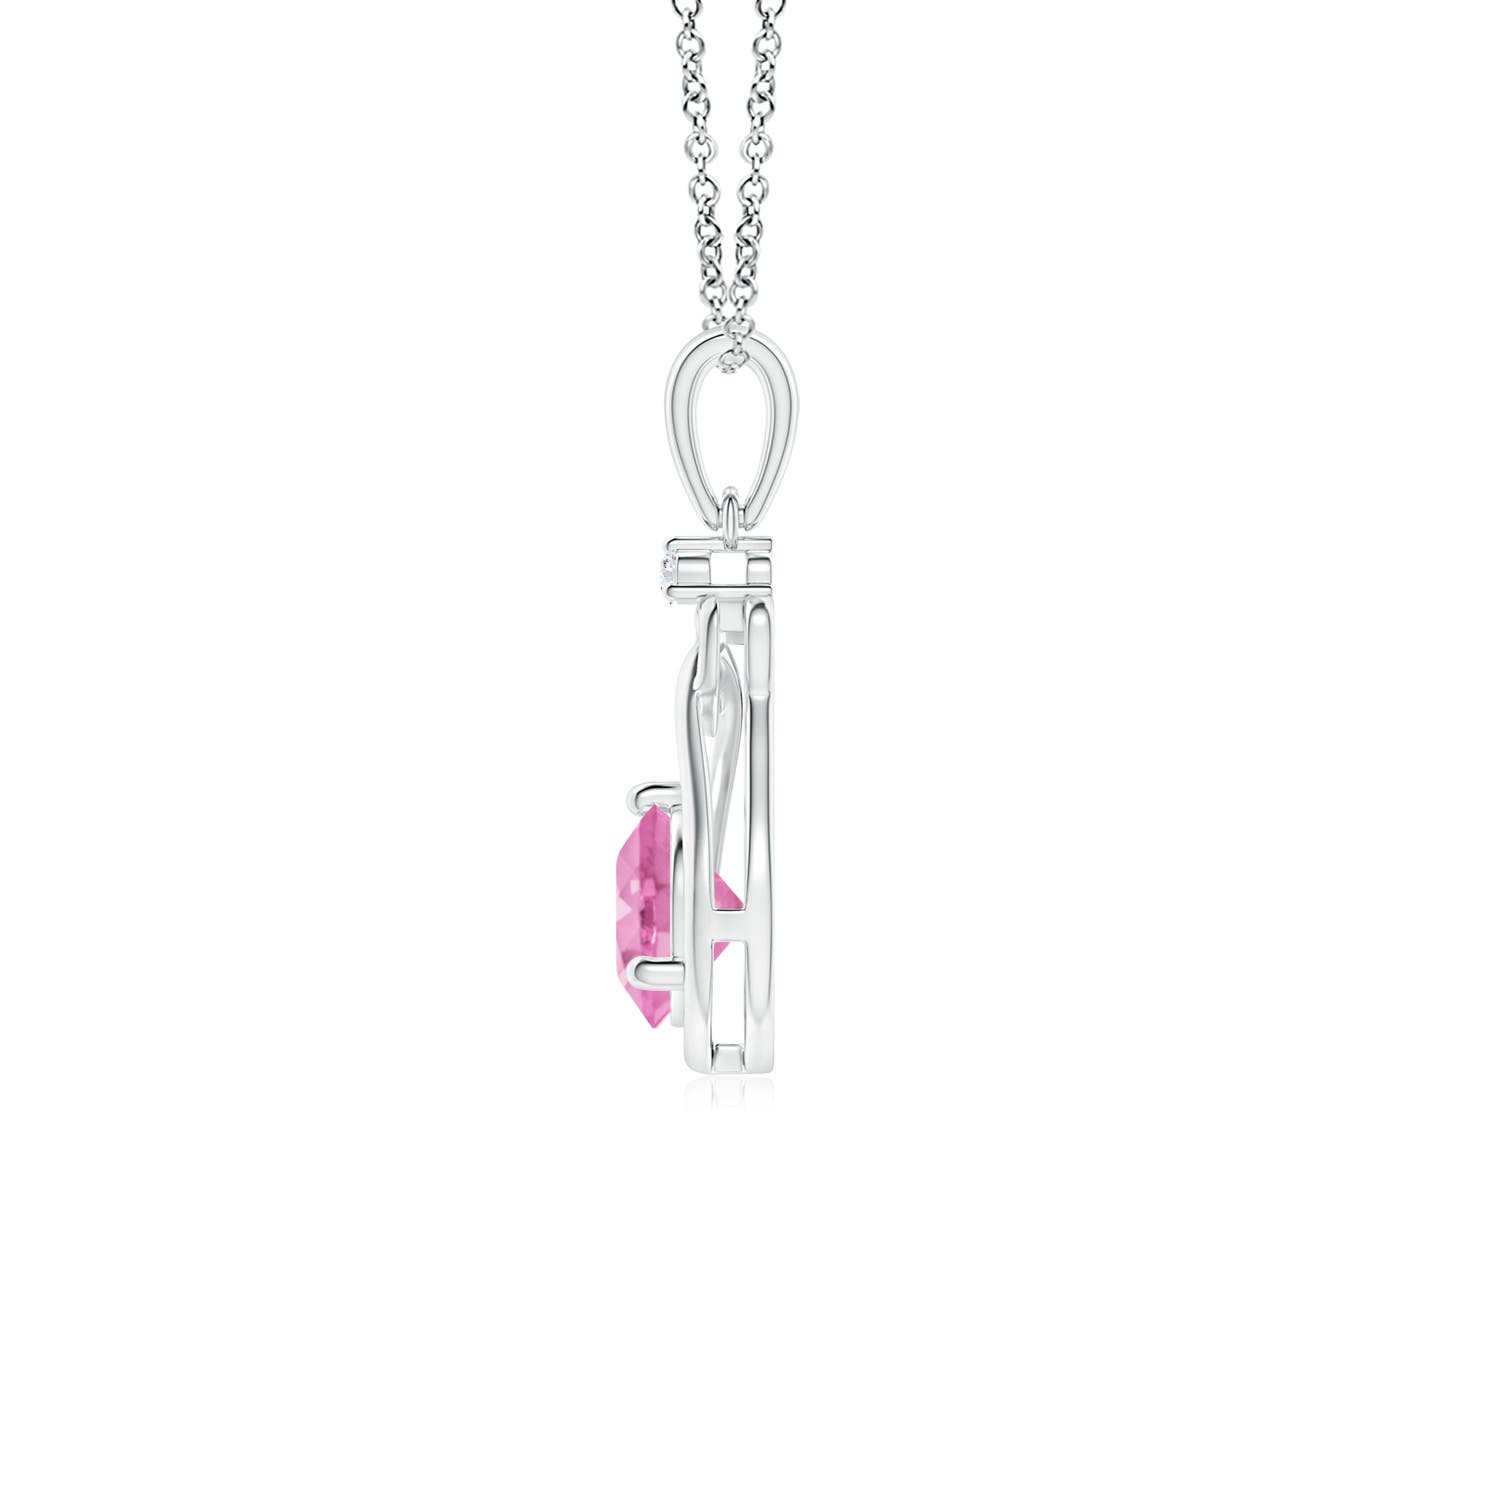 A - Pink Sapphire / 0.61 CT / 14 KT White Gold